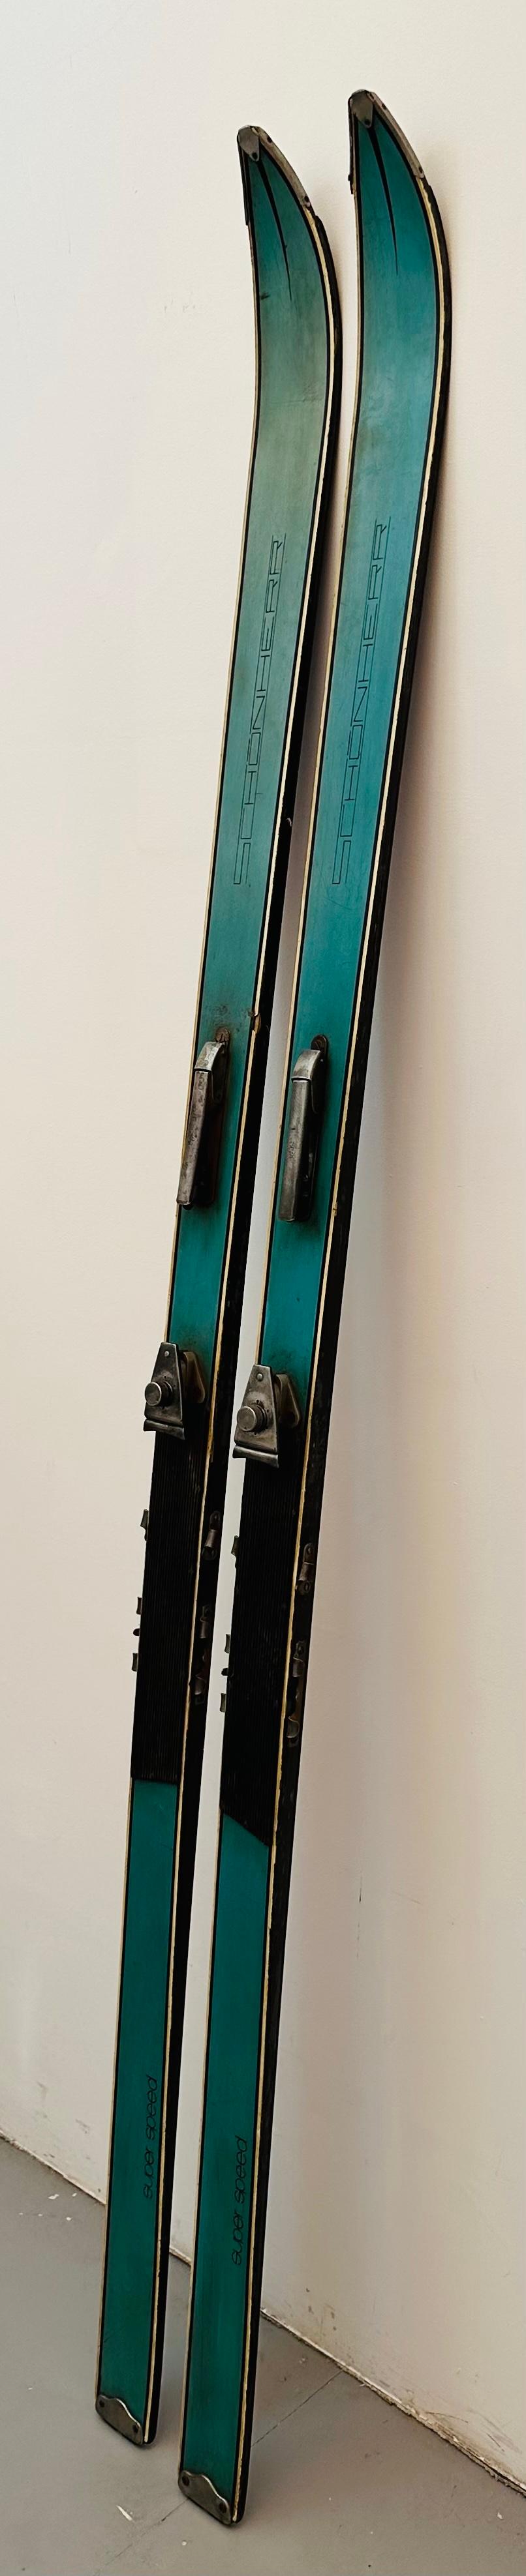 skis for decoration